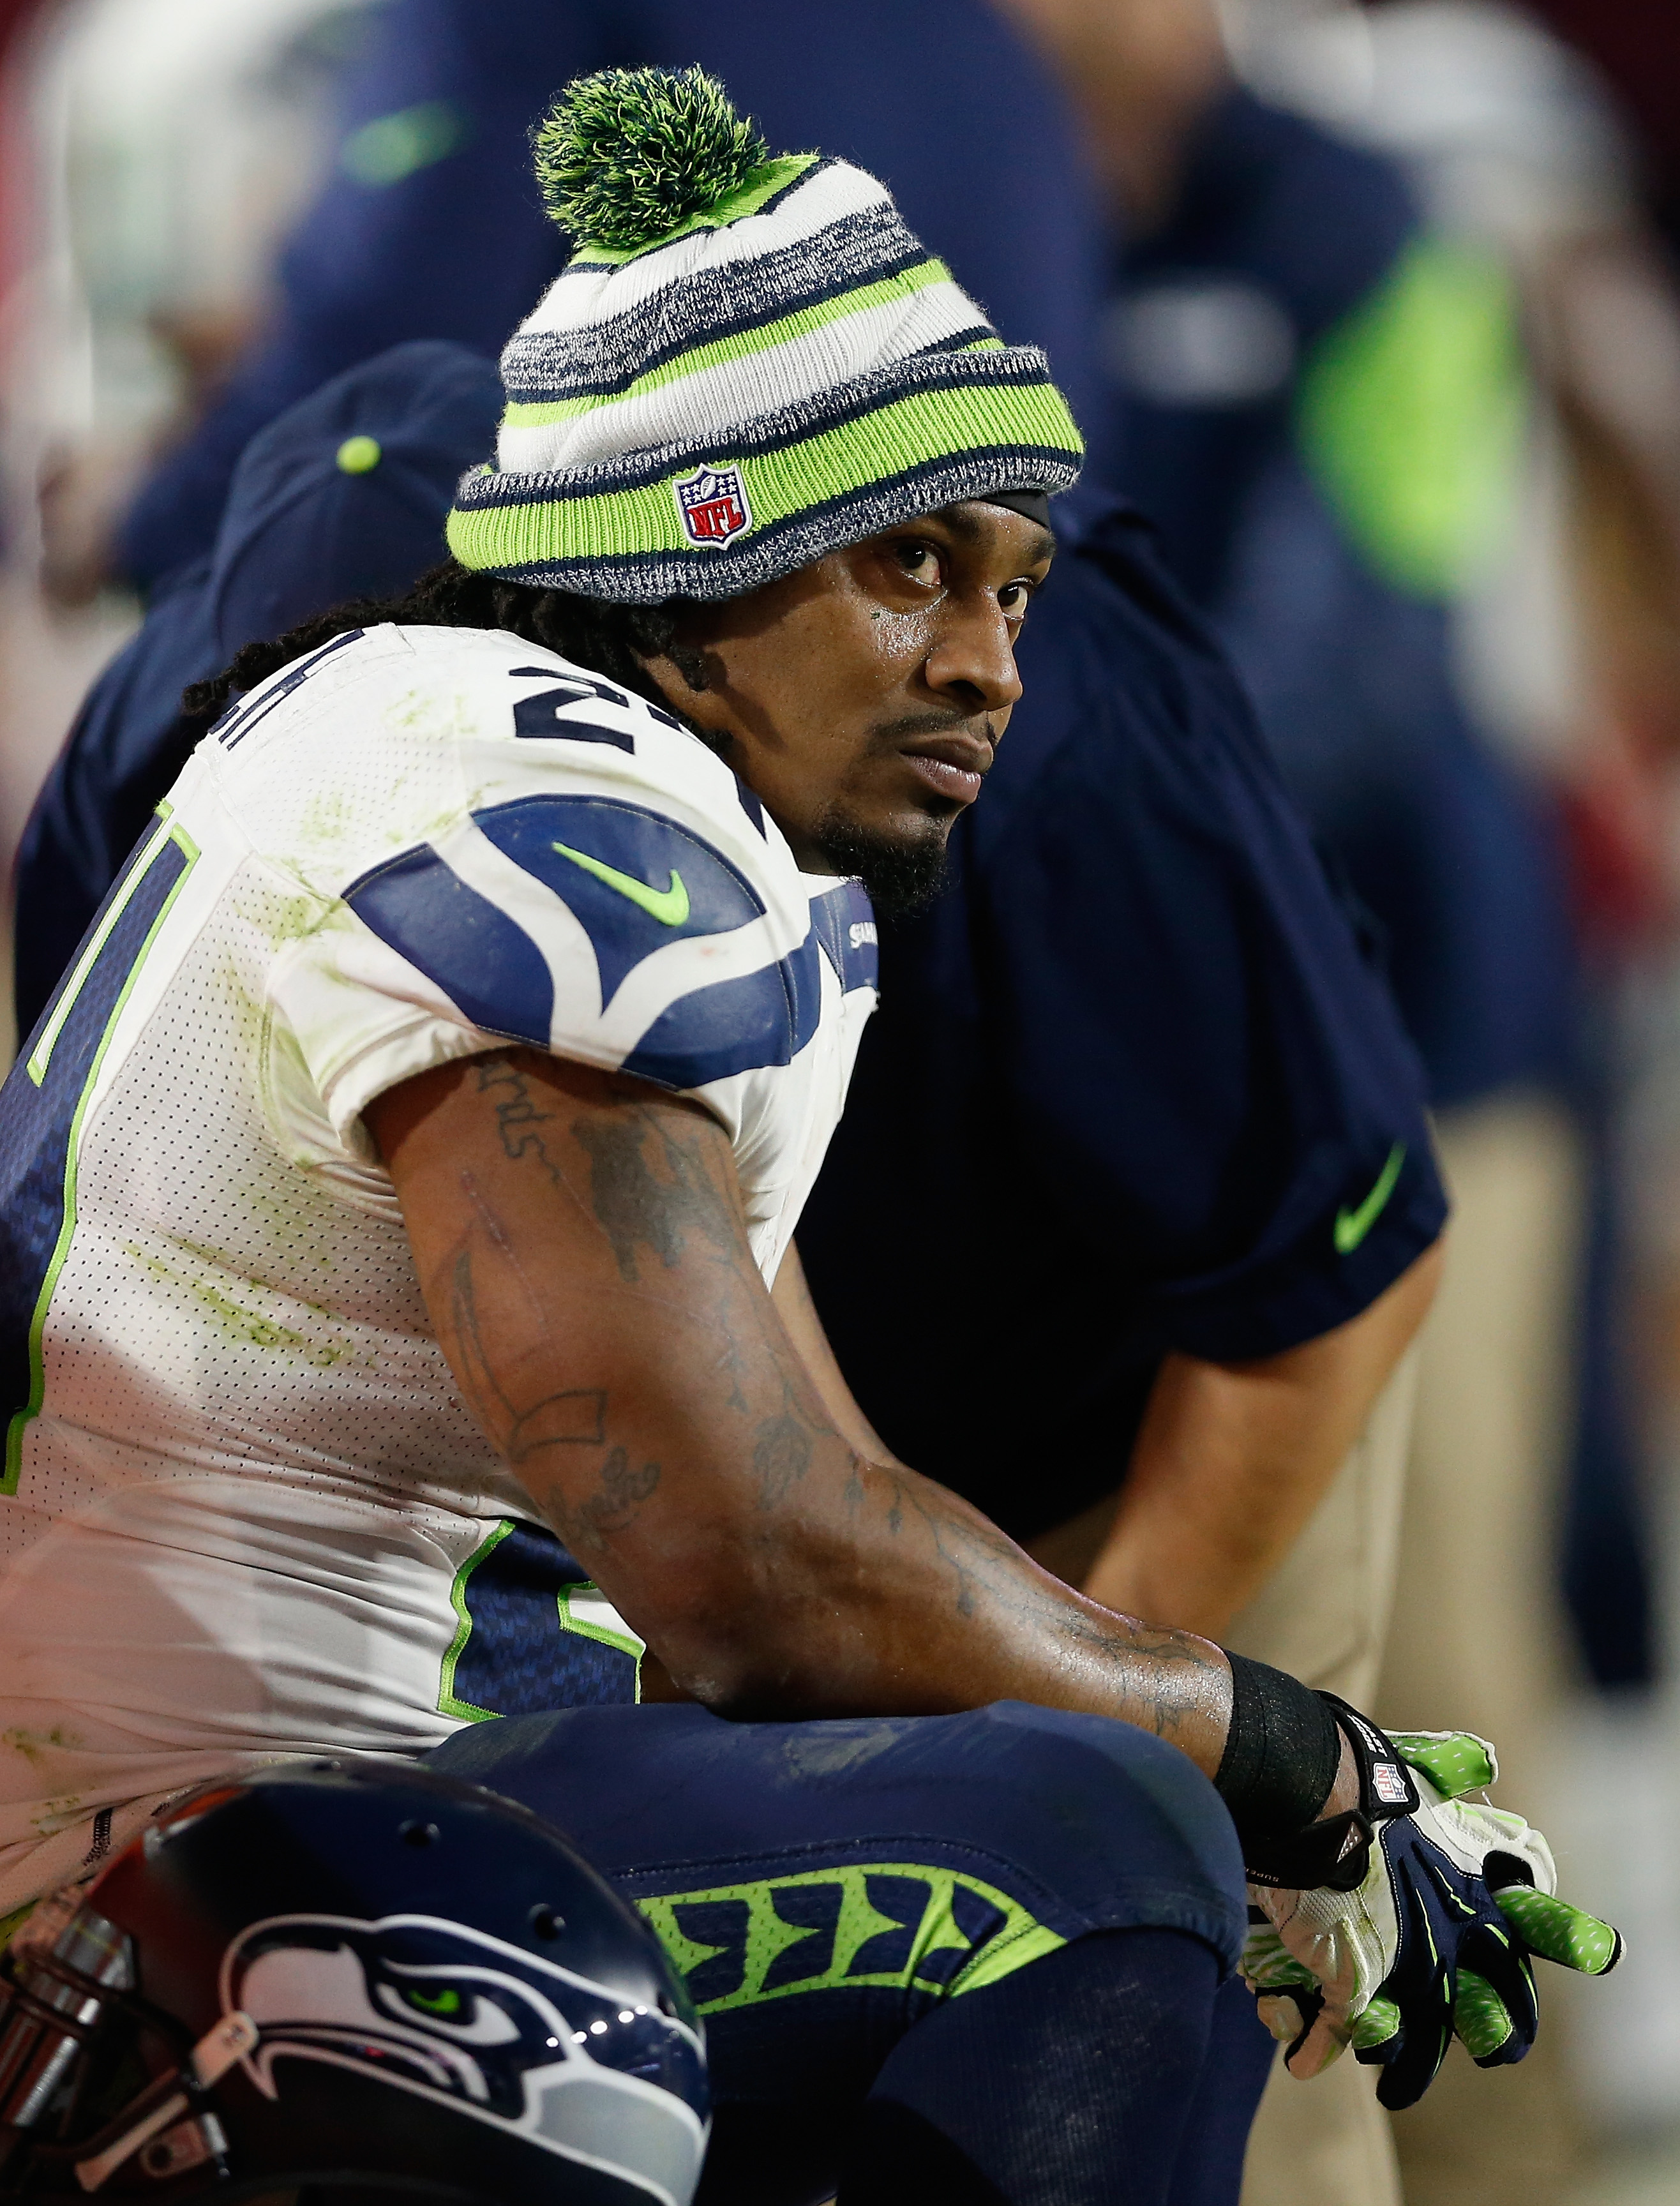 Running back Marshawn Lynch of the Seattle Seahawks on the sidelines during the NFL game against the Arizona Cardinals at the University of Phoenix Stadium on Dec. 21, 2014 in Glendale, Ariz. (Christian Petersen—Getty Images)